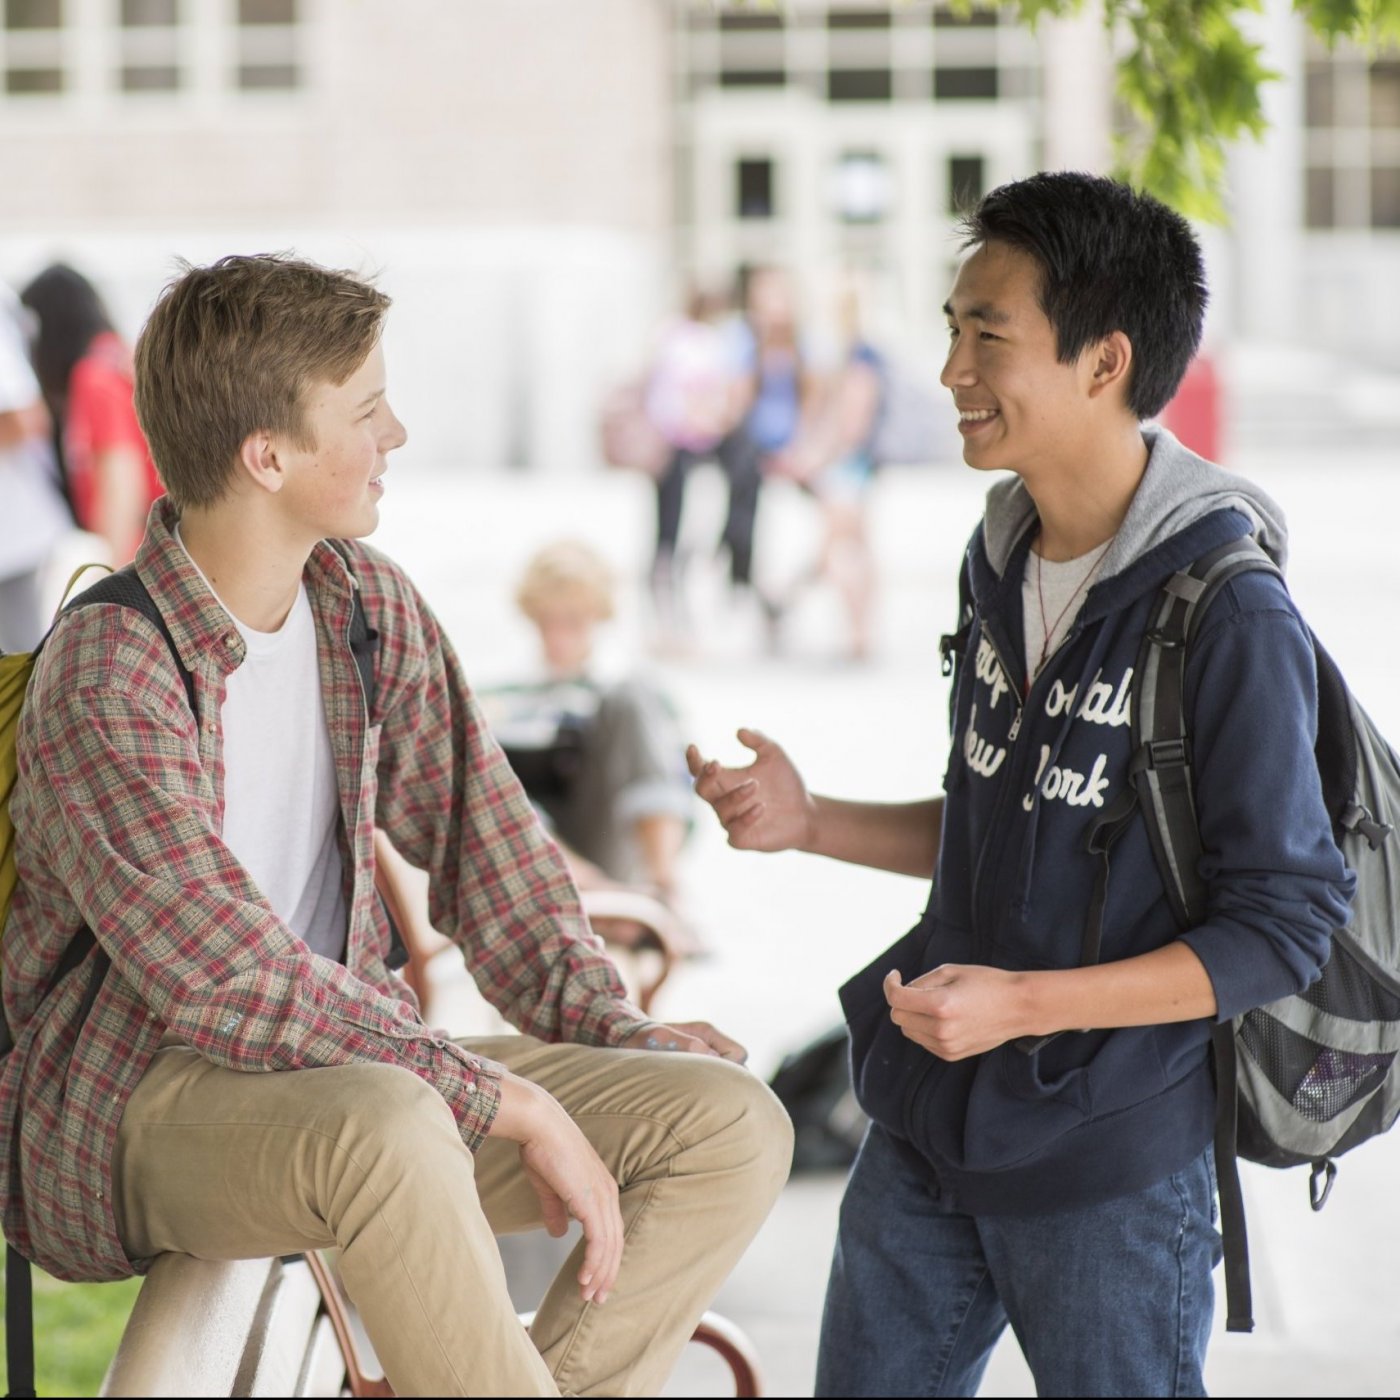 Two students chatting at a university